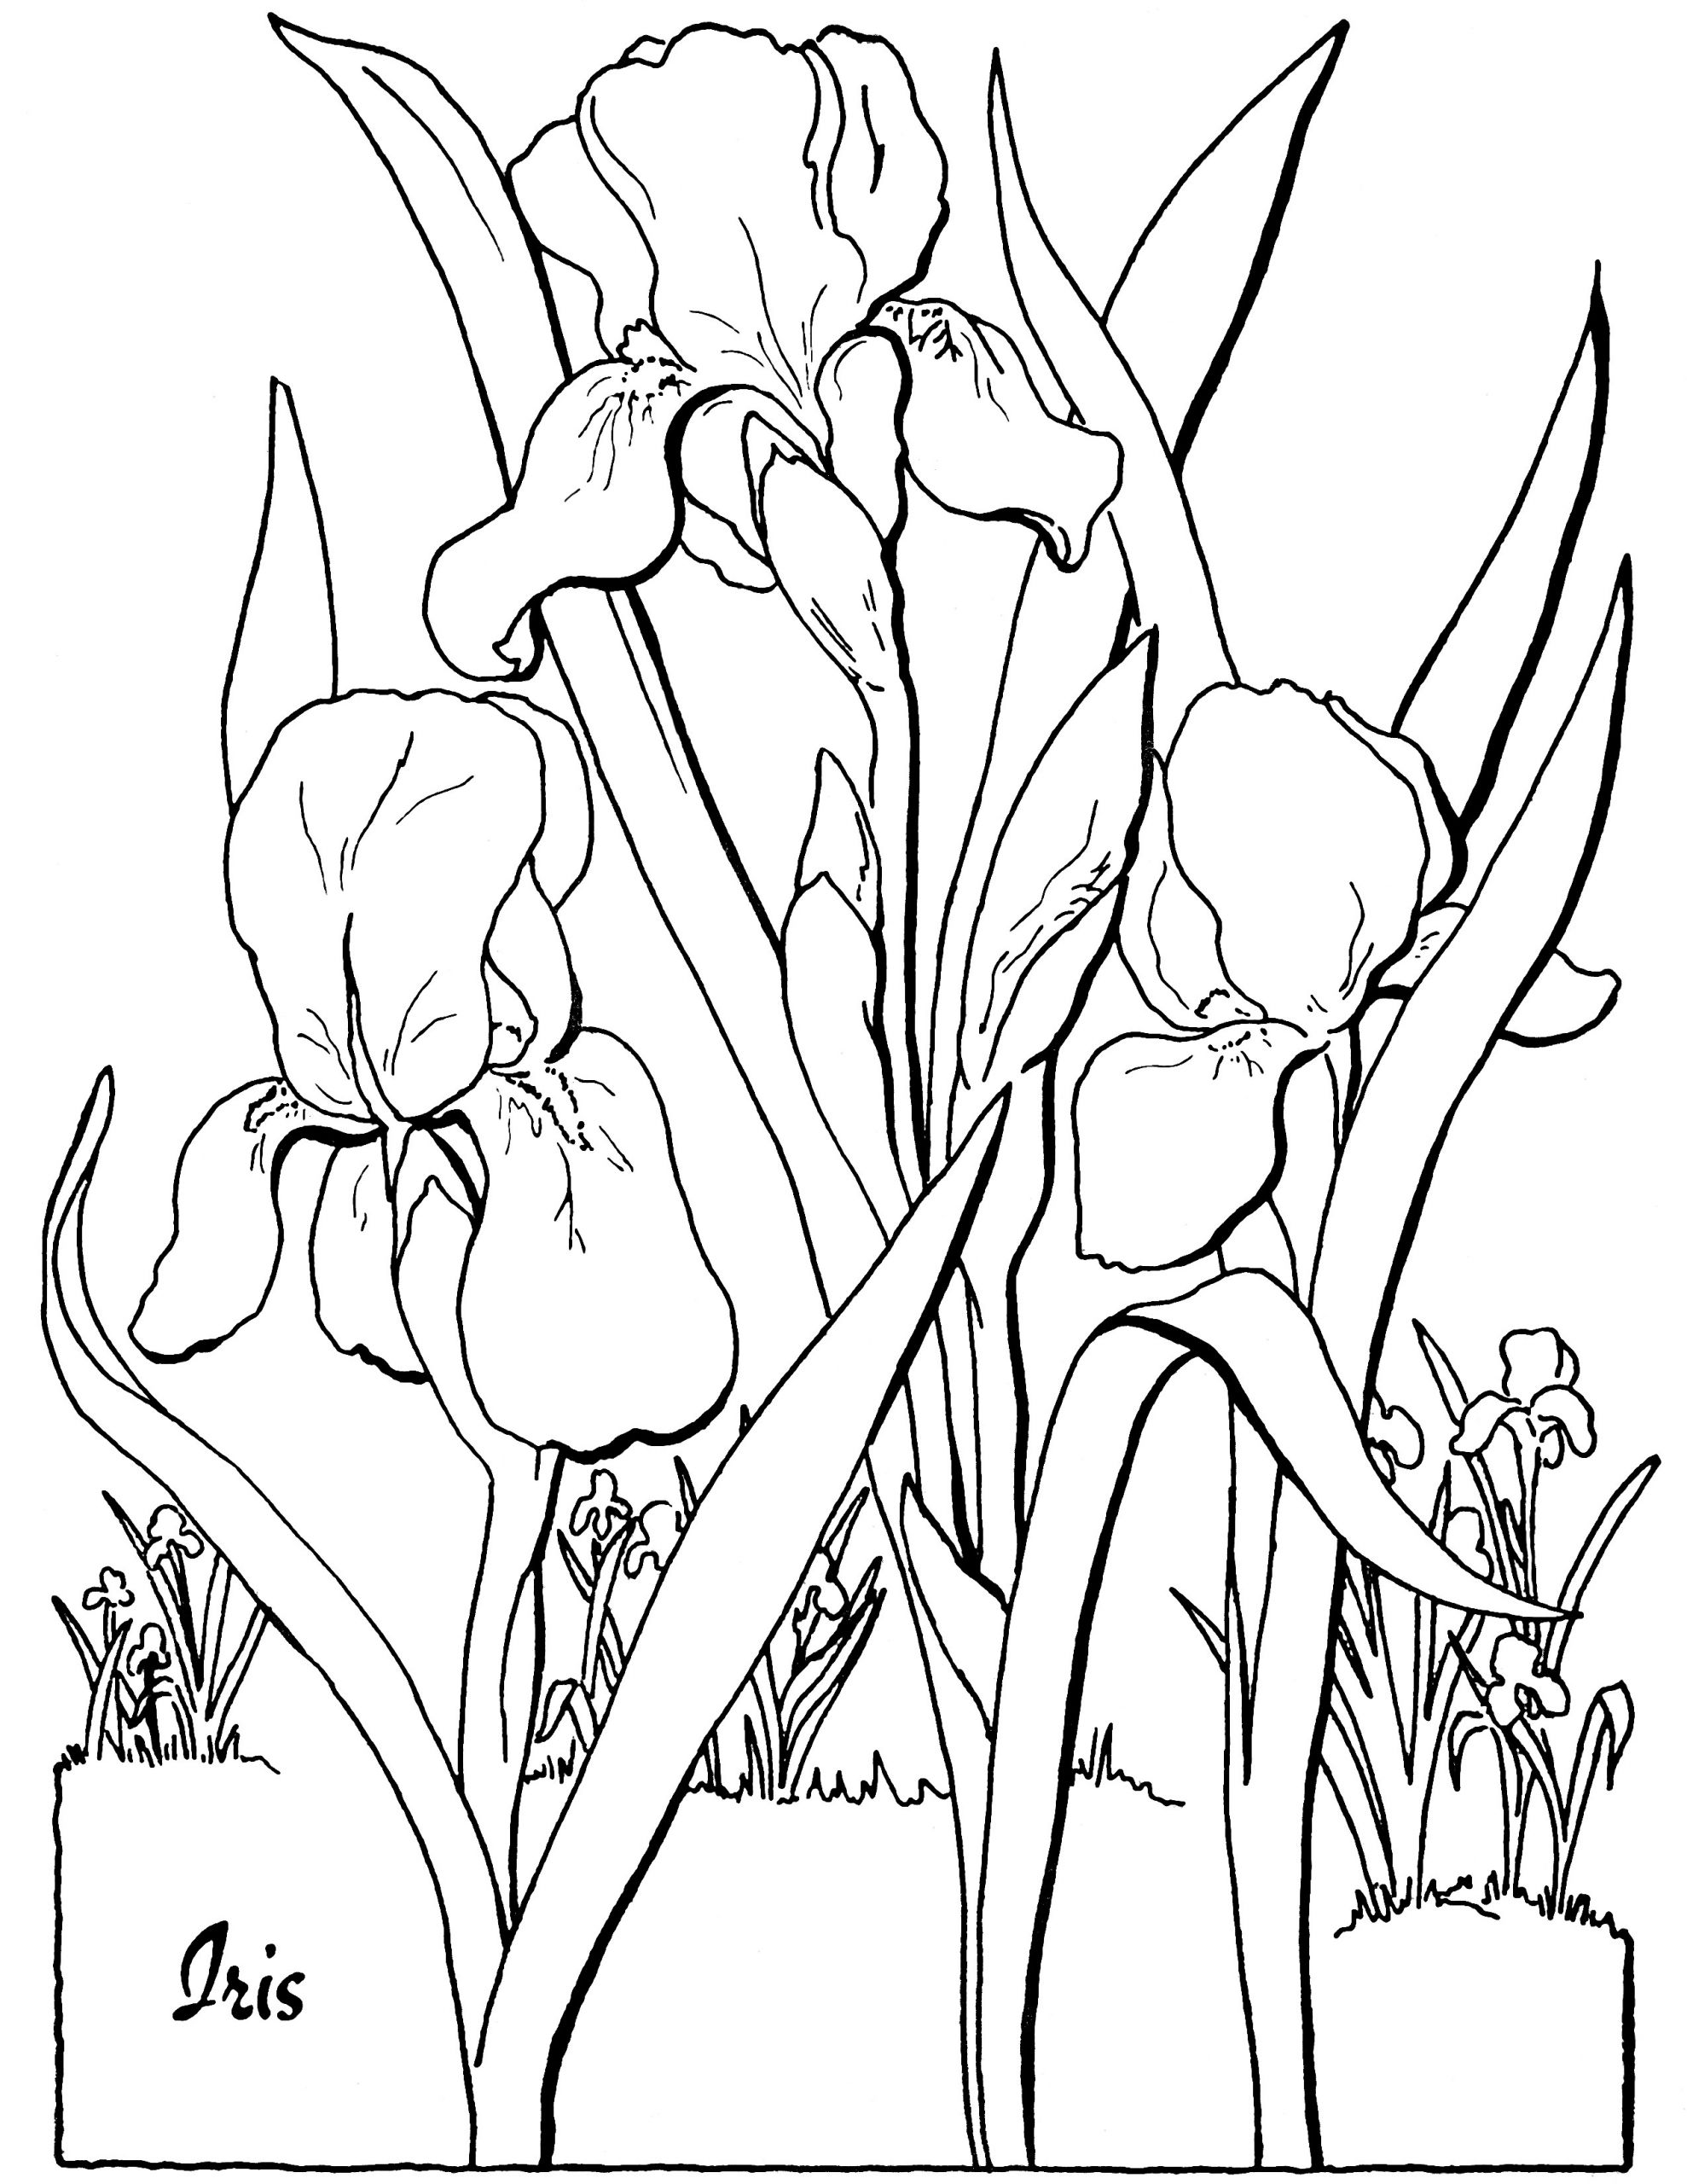 Adult Coloring Book Pages Free
 Free Adult Floral Coloring Page The Graphics Fairy